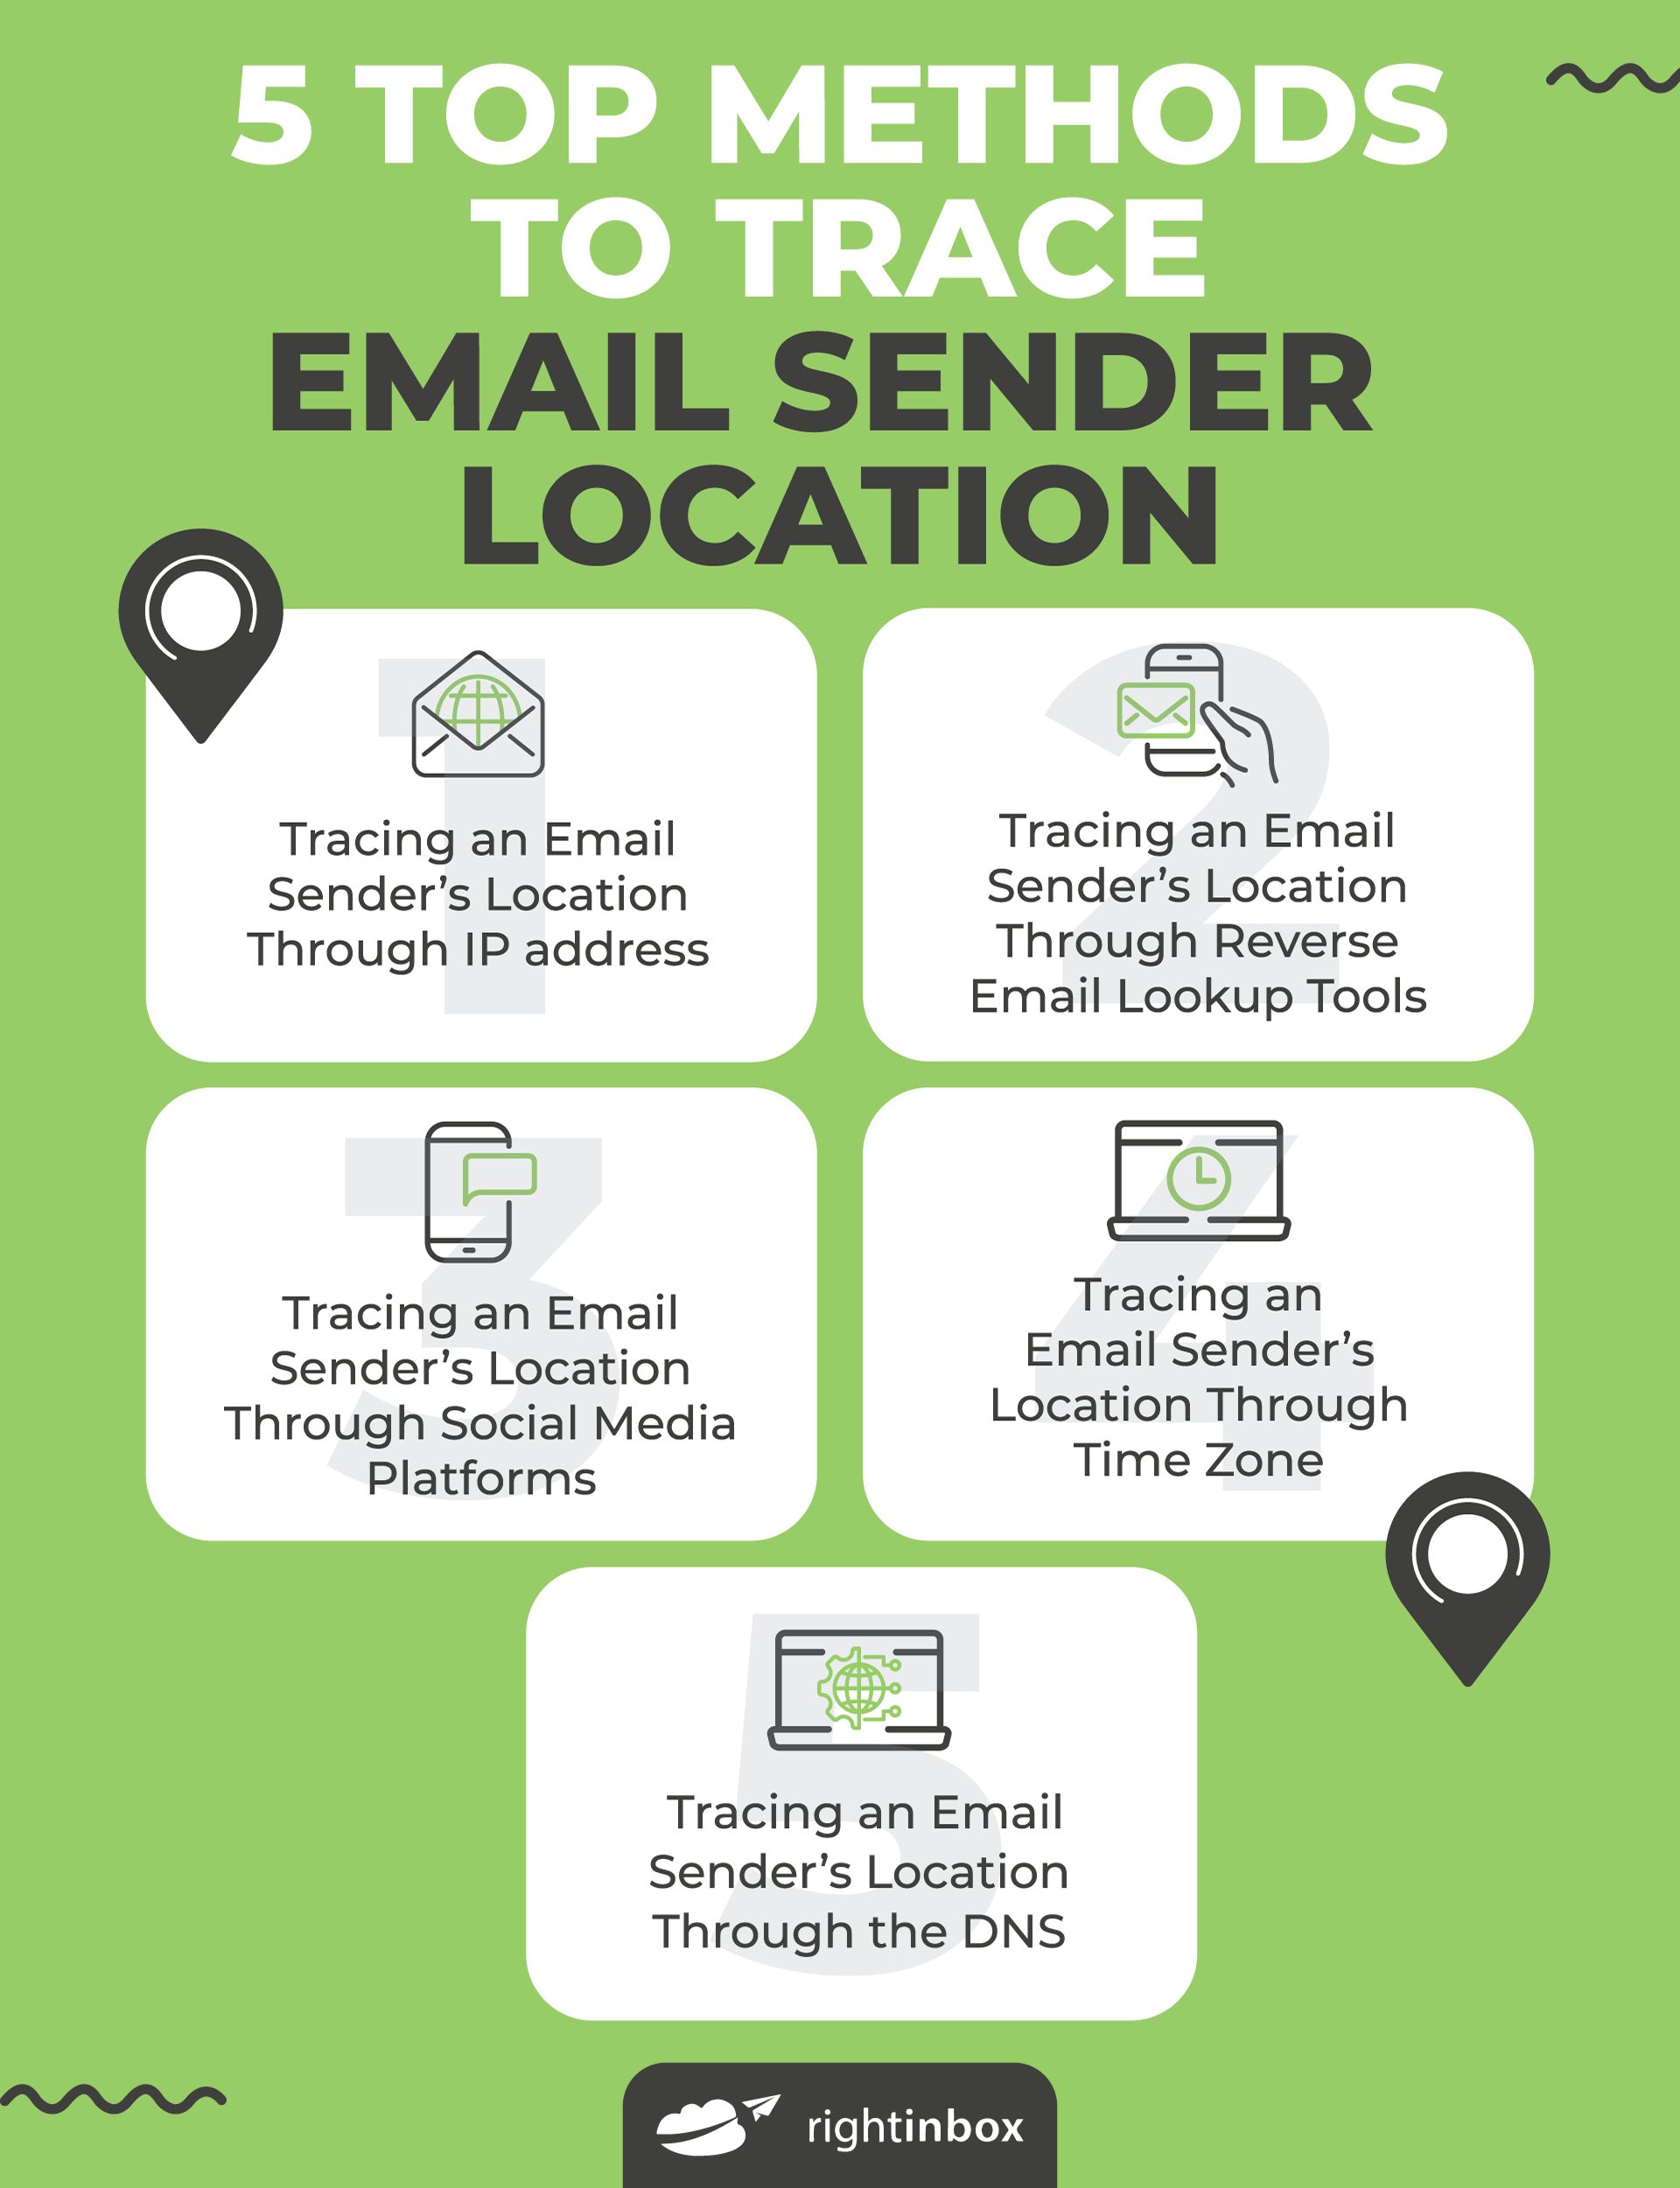 5 methods to trace email sender